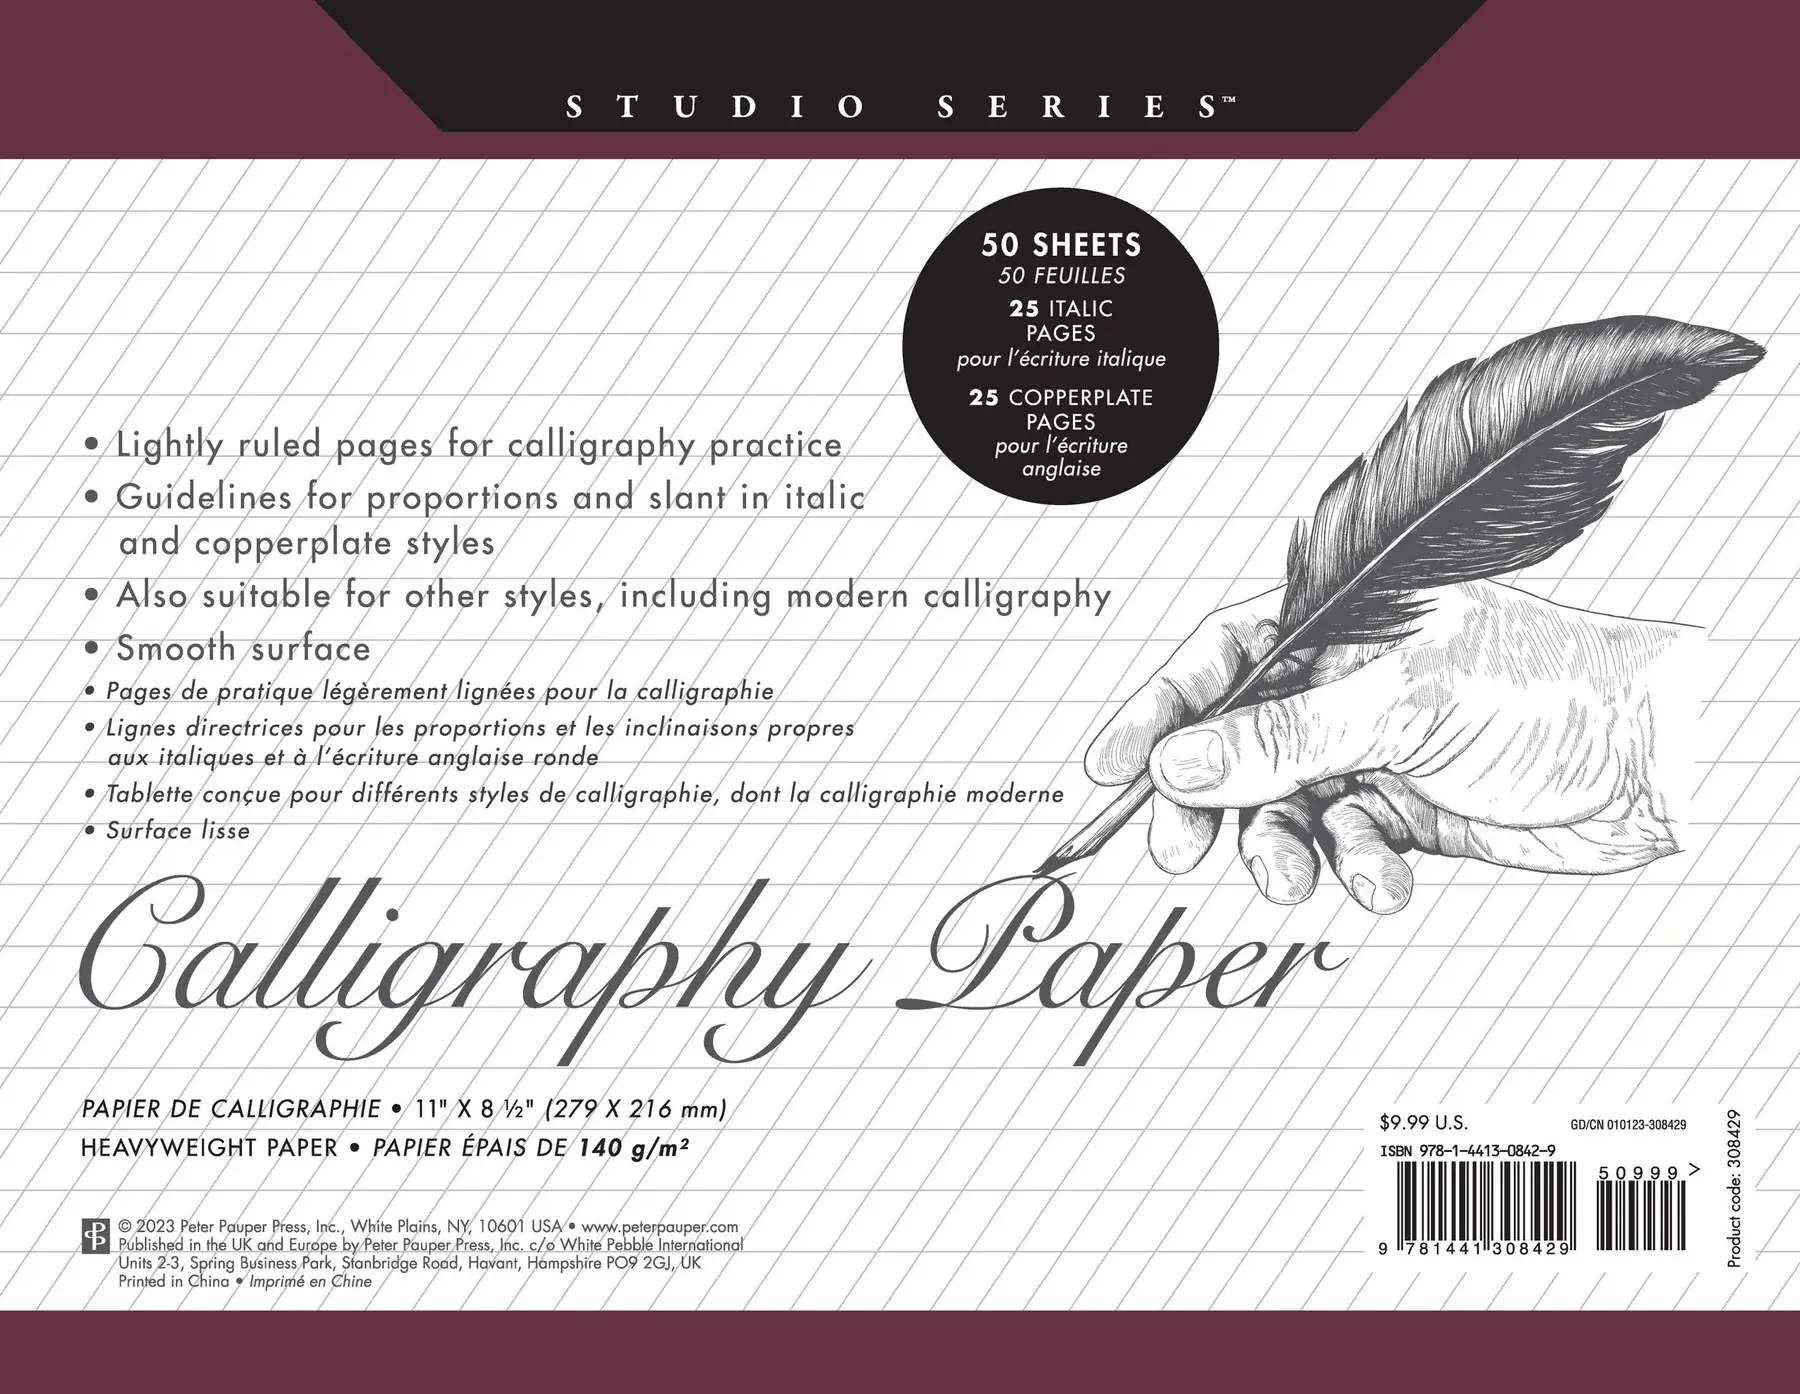 Calligraphy Paper Practice: Handwriting Practice for Adults - 160 Sheet Pad  (Paperback)